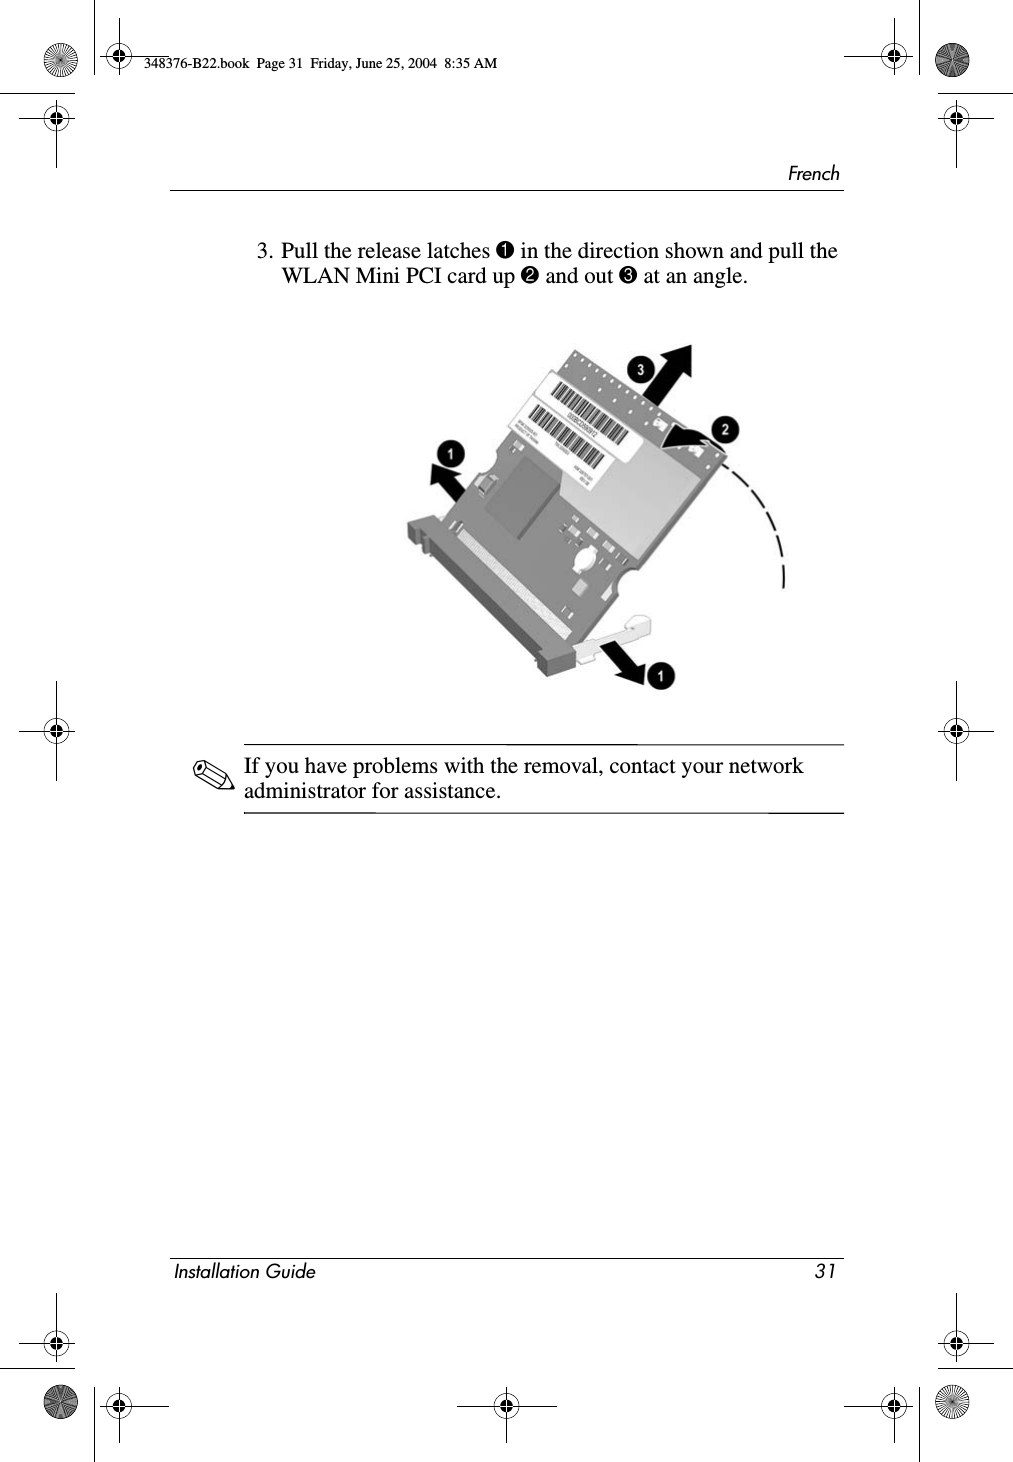 FrenchInstallation Guide 313. Pull the release latches 1 in the direction shown and pull the WLAN Mini PCI card up 2 and out 3 at an angle.✎If you have problems with the removal, contact your network administrator for assistance.348376-B22.book  Page 31  Friday, June 25, 2004  8:35 AM